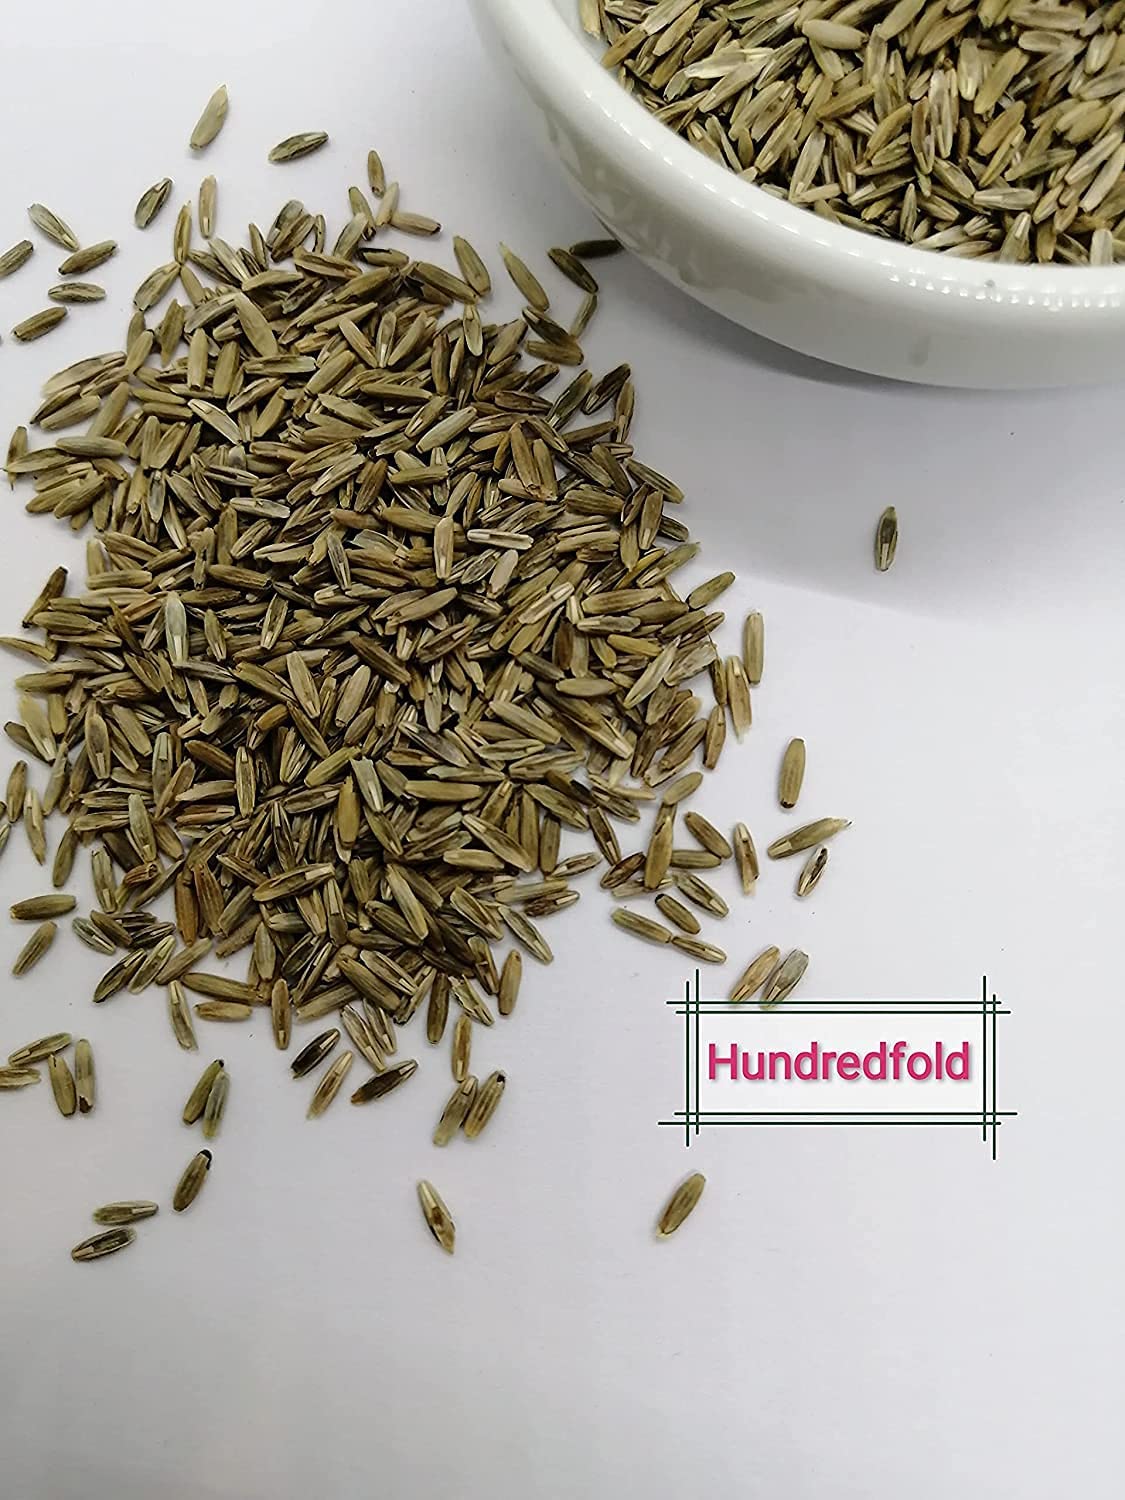 Hundredfold 4lbs Organic Annual Ryegrass Seeds - Festuca perennis Non-GMO, Low-Growing Cover Crop, Soil Enrichment and Weed Suppression, Packed and Shipped in Canada